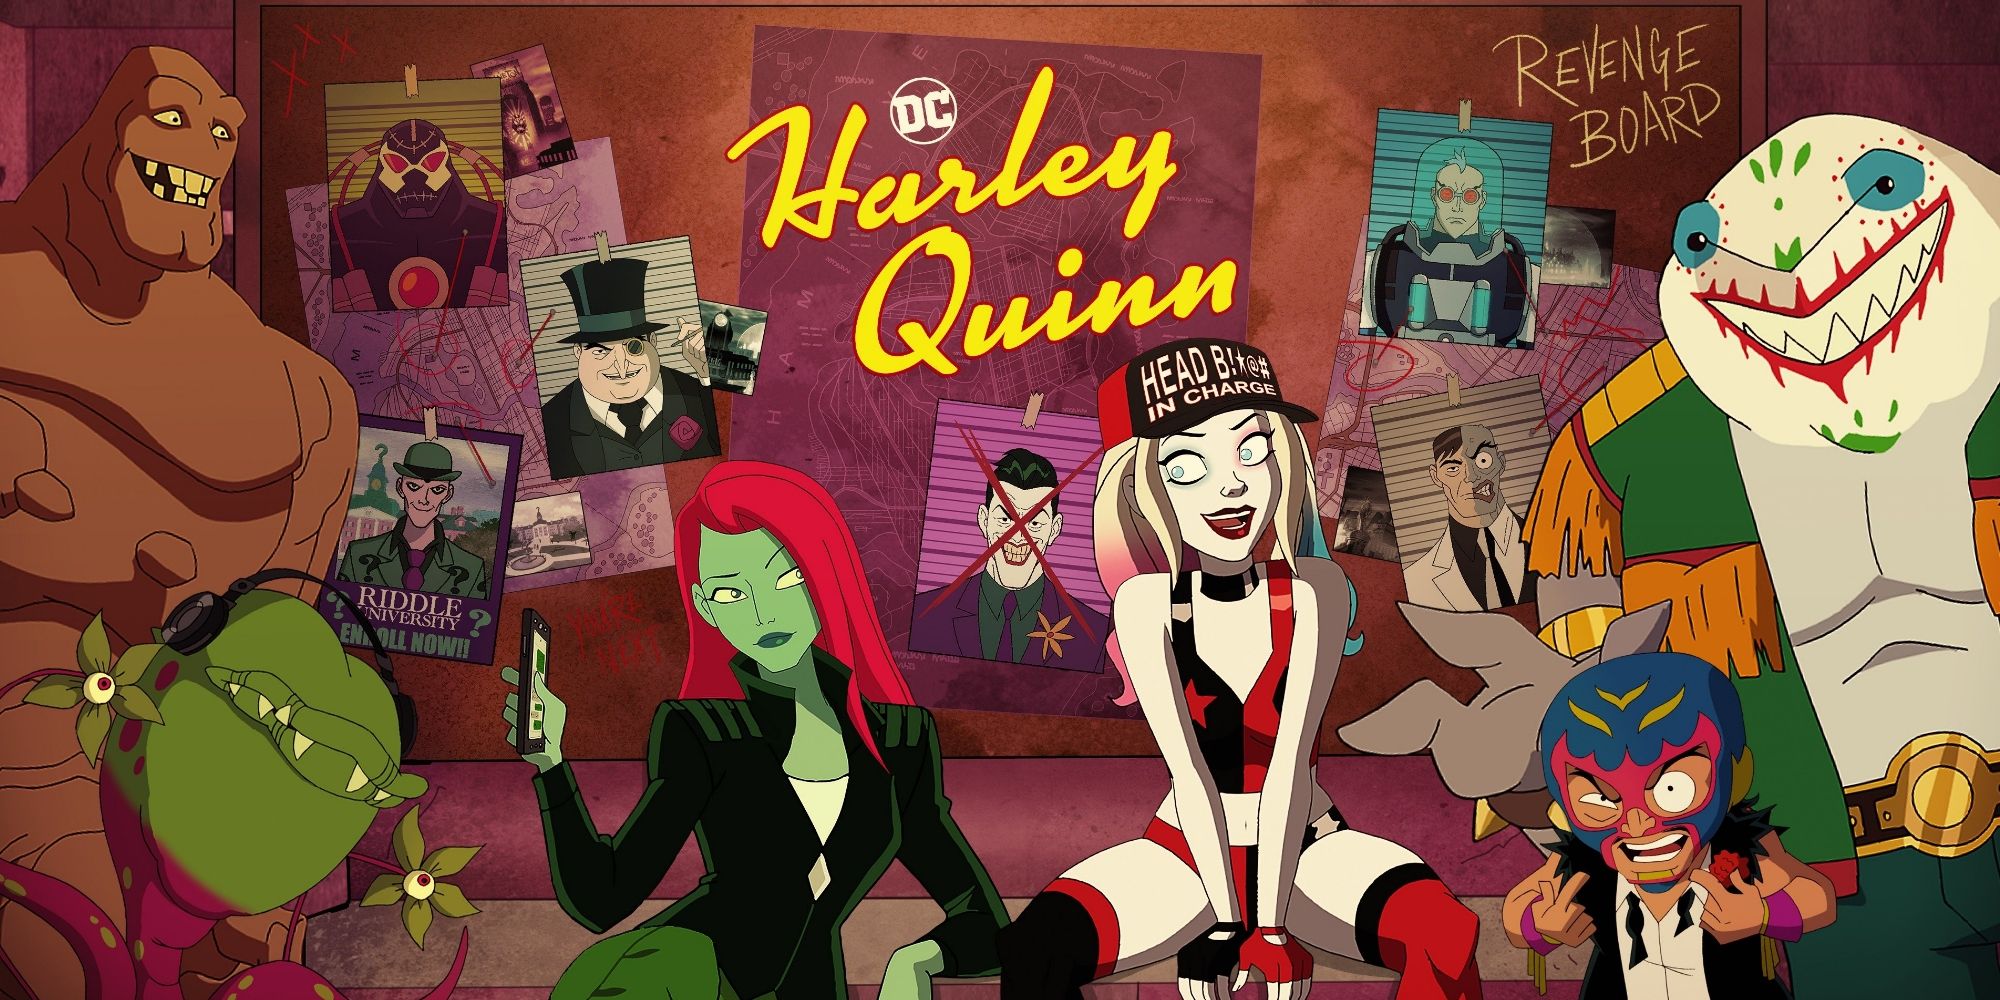 Promotional poster for 'Harley Quinn' showing Harley, Poison Ivy, Clayface, King Shark, Doctor Psycho, Sy Borgman and Frank the Plant sitting on a couch